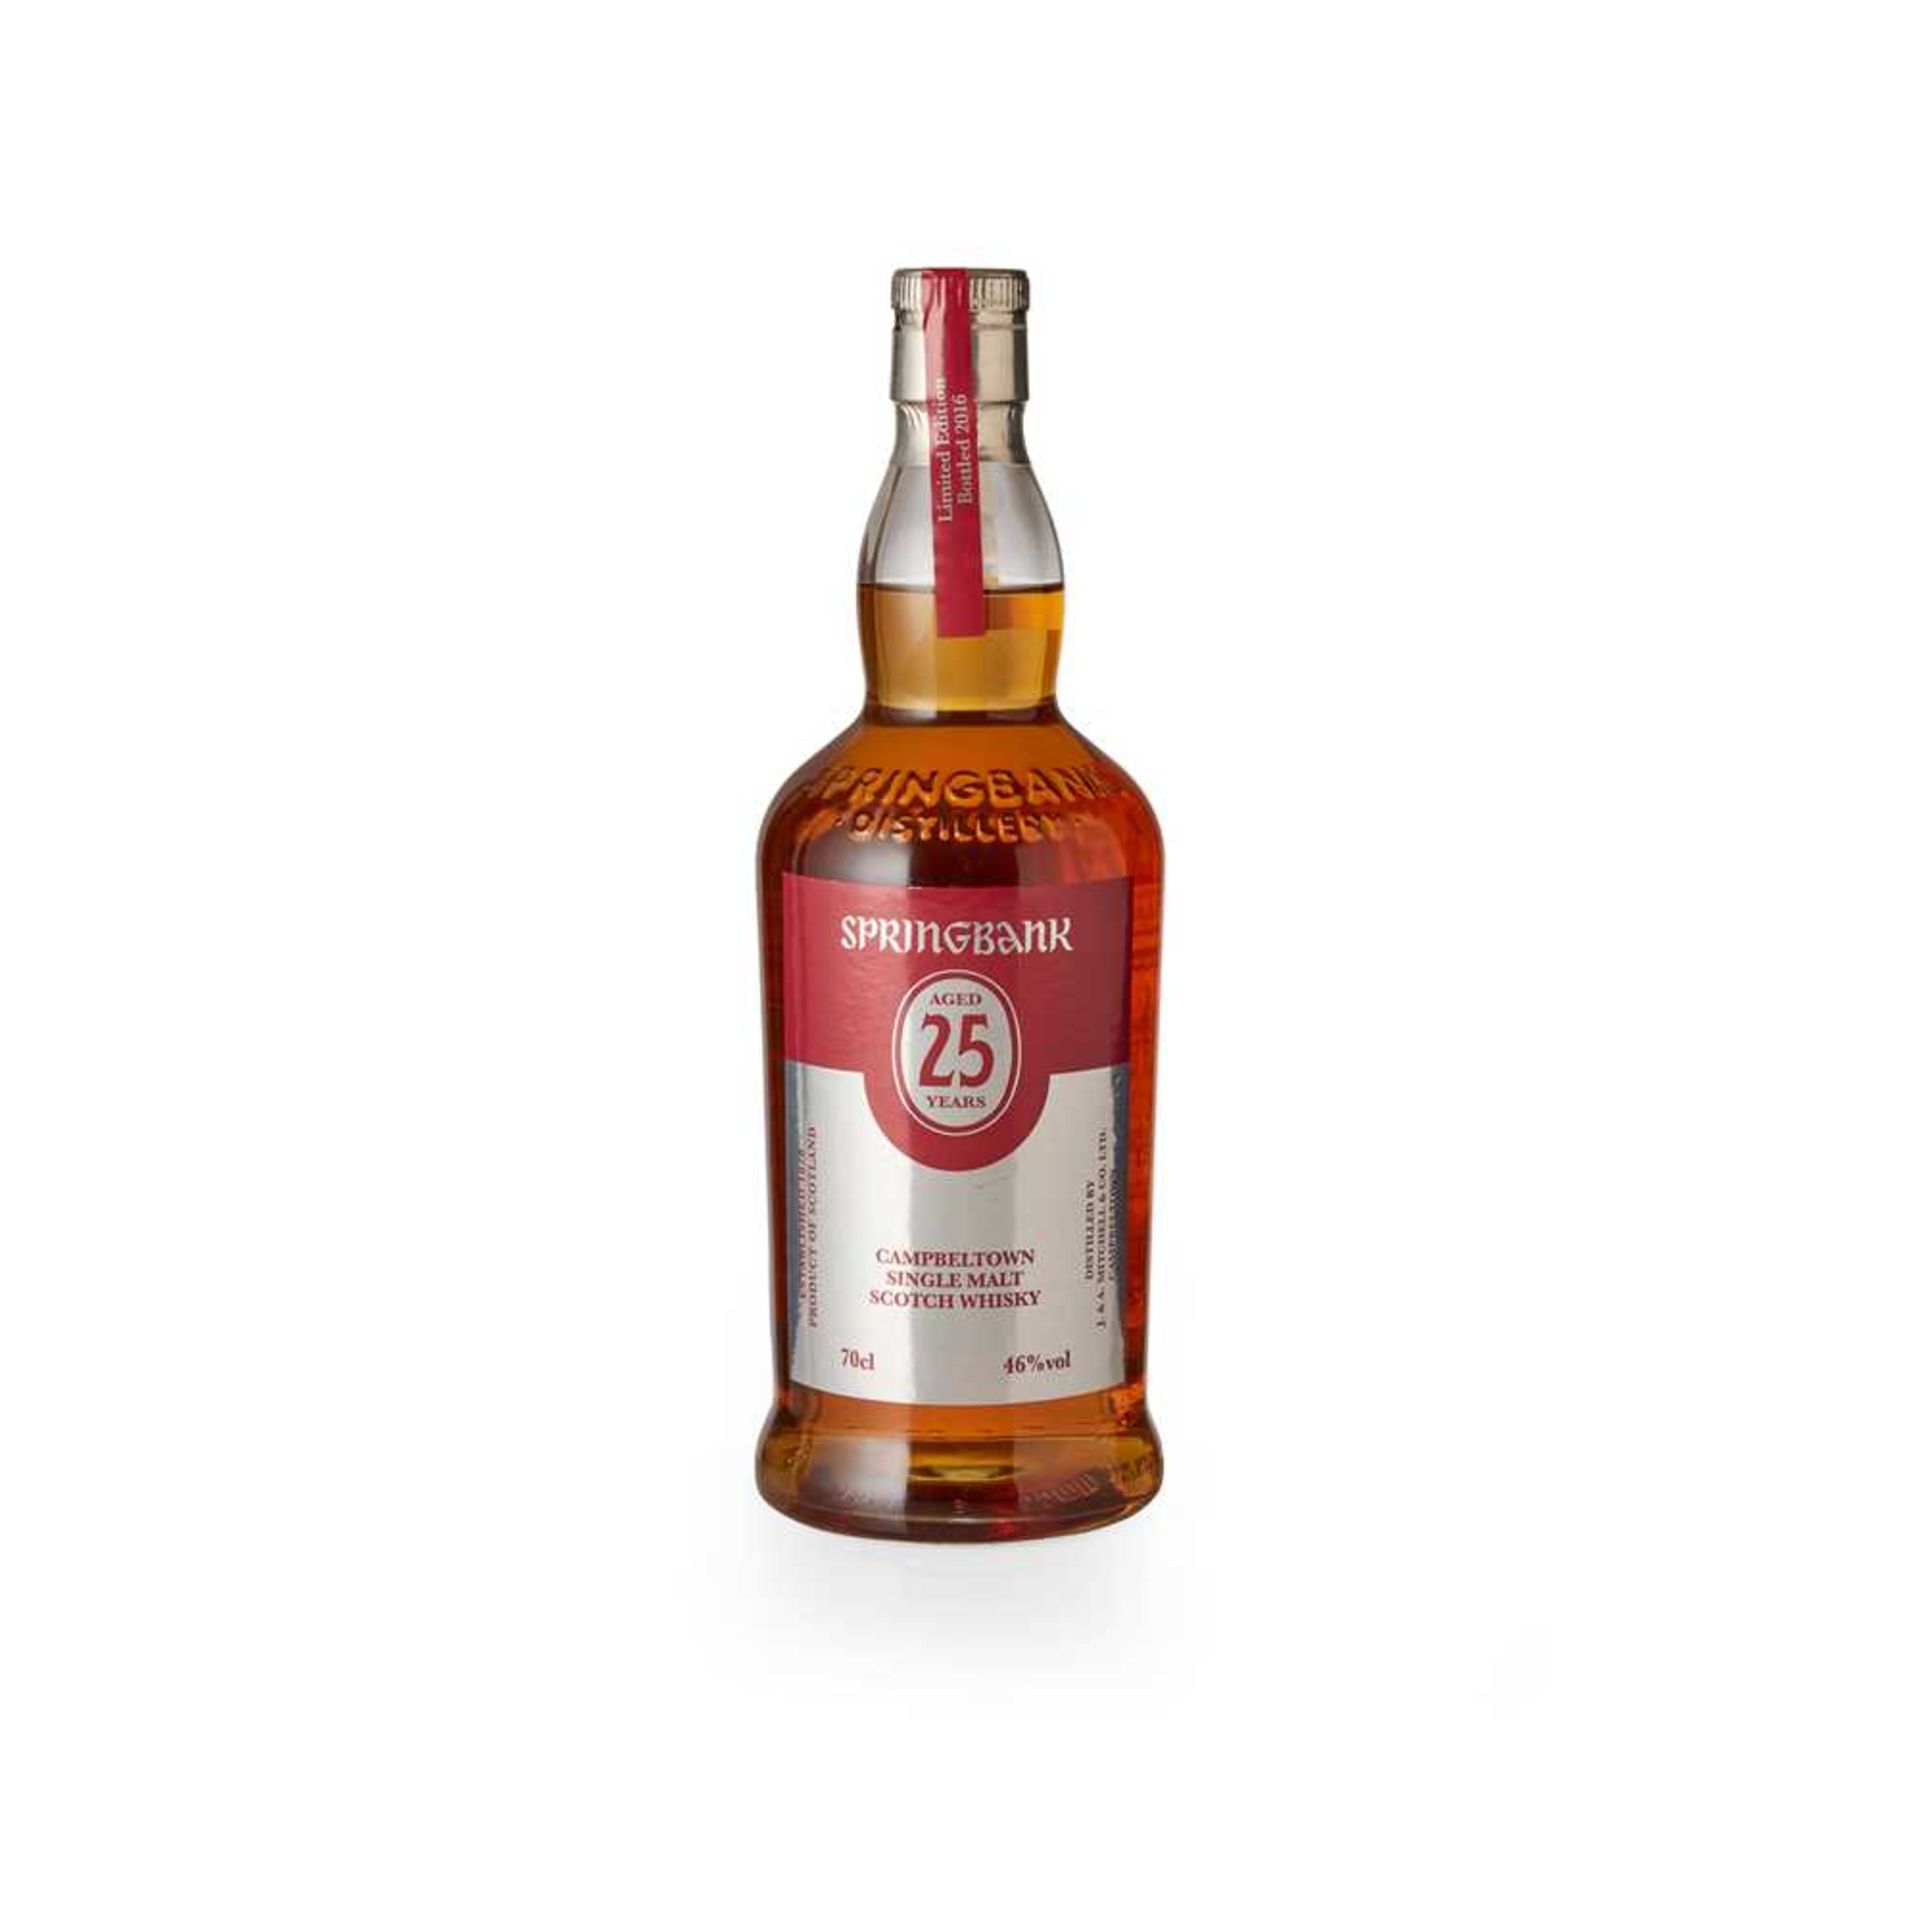 SPRINGBANK 25 YEAR OLD - Image 2 of 3